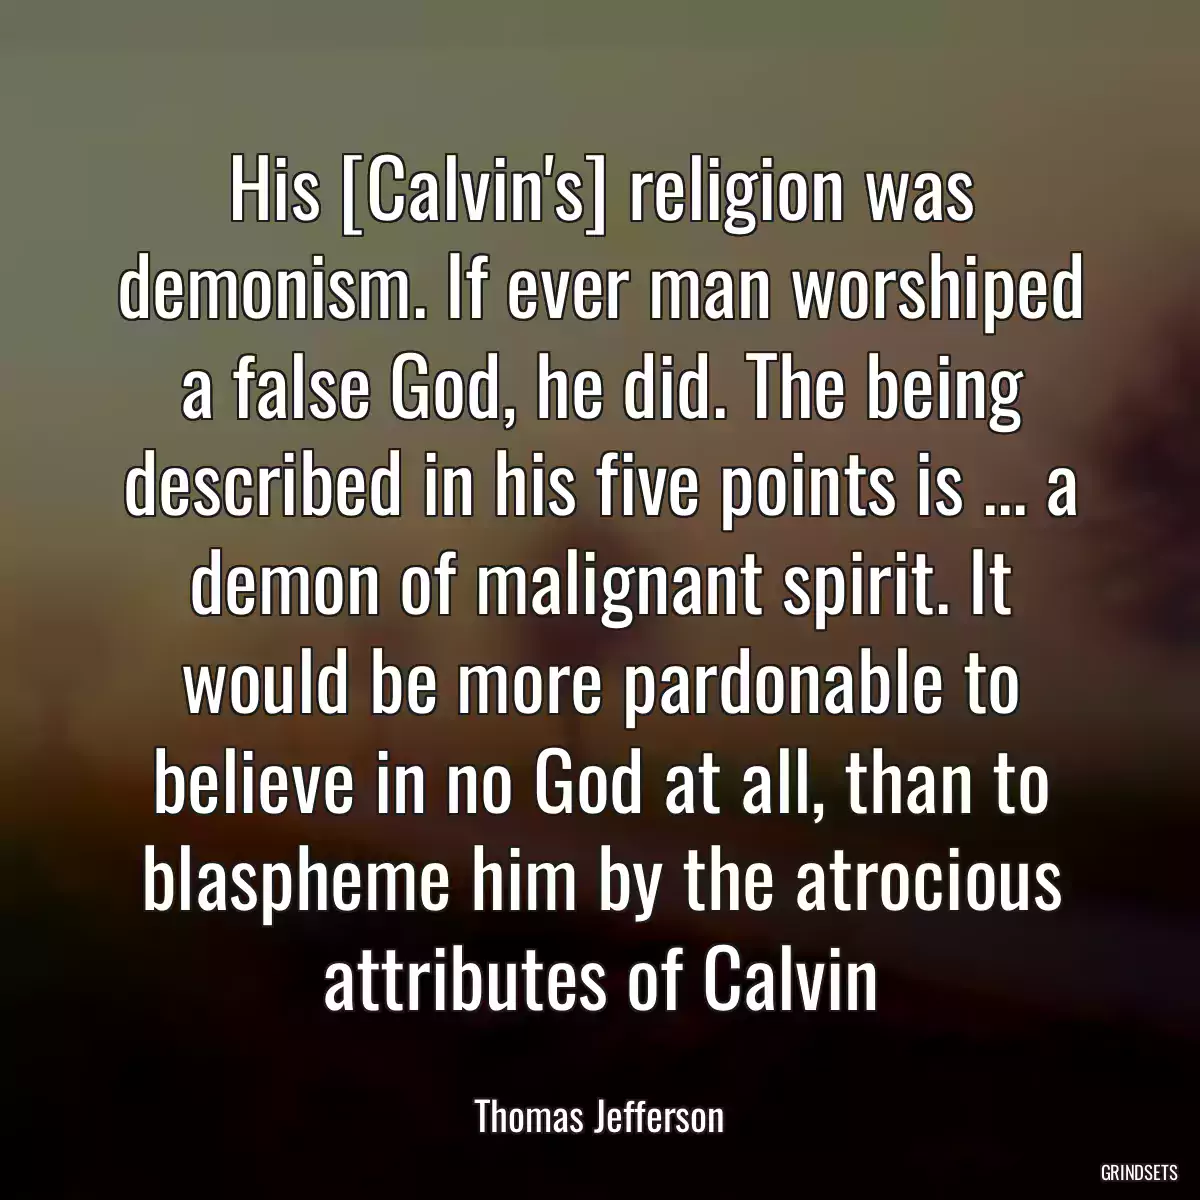 His [Calvin\'s] religion was demonism. If ever man worshiped a false God, he did. The being described in his five points is ... a demon of malignant spirit. It would be more pardonable to believe in no God at all, than to blaspheme him by the atrocious attributes of Calvin